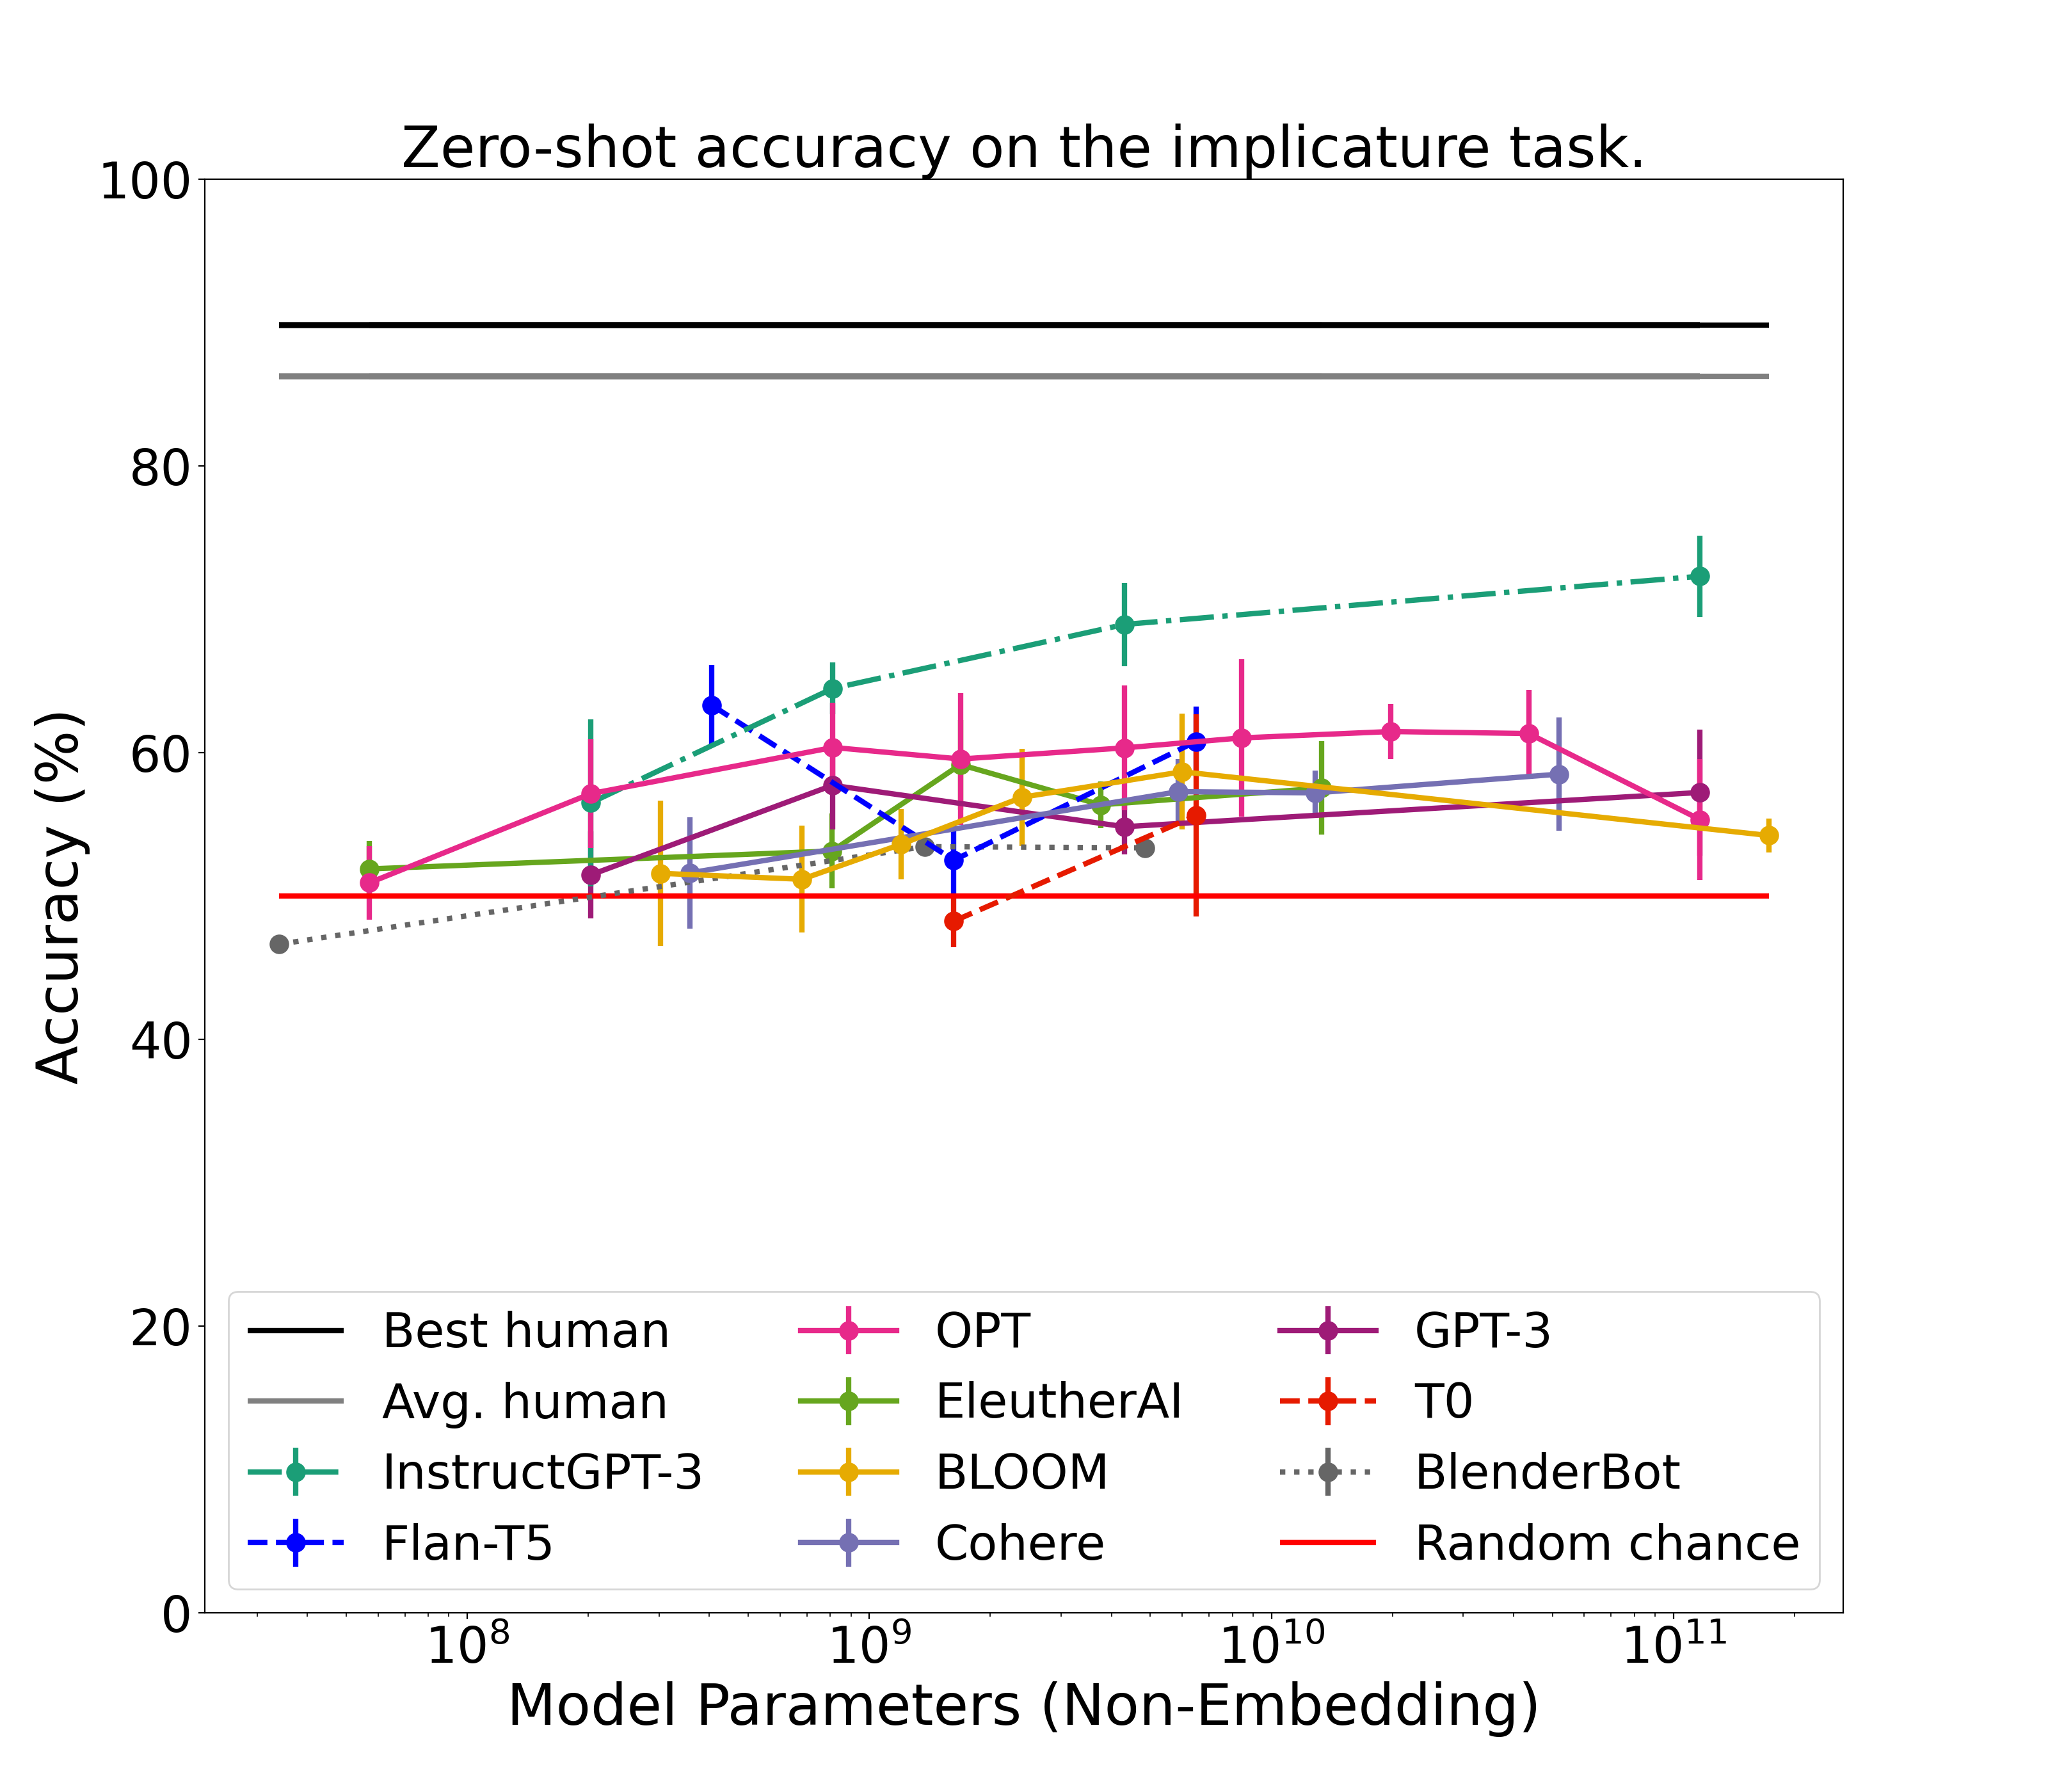 An image showing a scaling line plot with accuracy on the y-axis and log model size on the x-axis. The image shows multiple lines, each representing a model like InstructGPT, the show a logarithmically increasing line from about 55% accuracy for the worst model to 72% accuracy for the best model. The plot also shows human performance as a horizontal line at 86% accuracy.